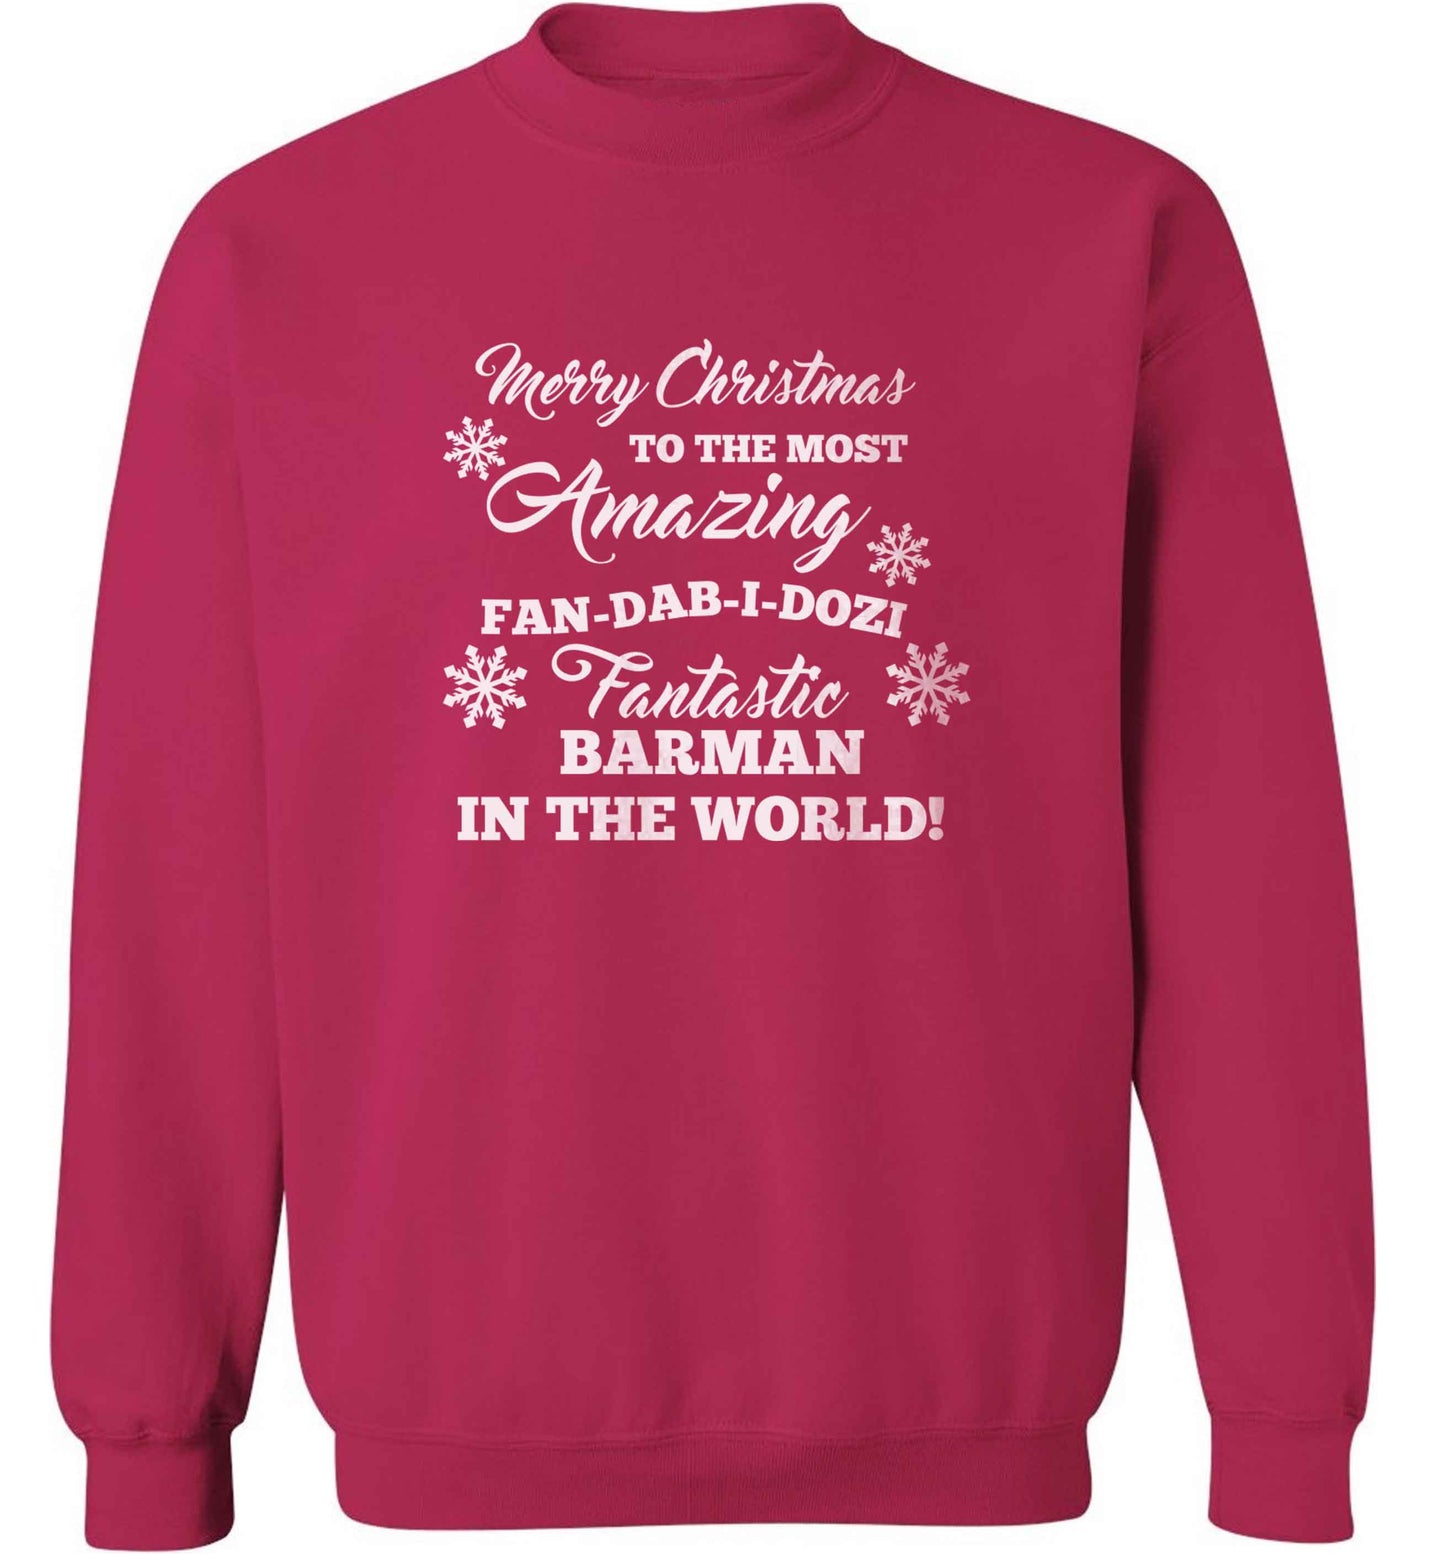 Merry Christmas to the most amazing barman in the world! adult's unisex pink sweater 2XL